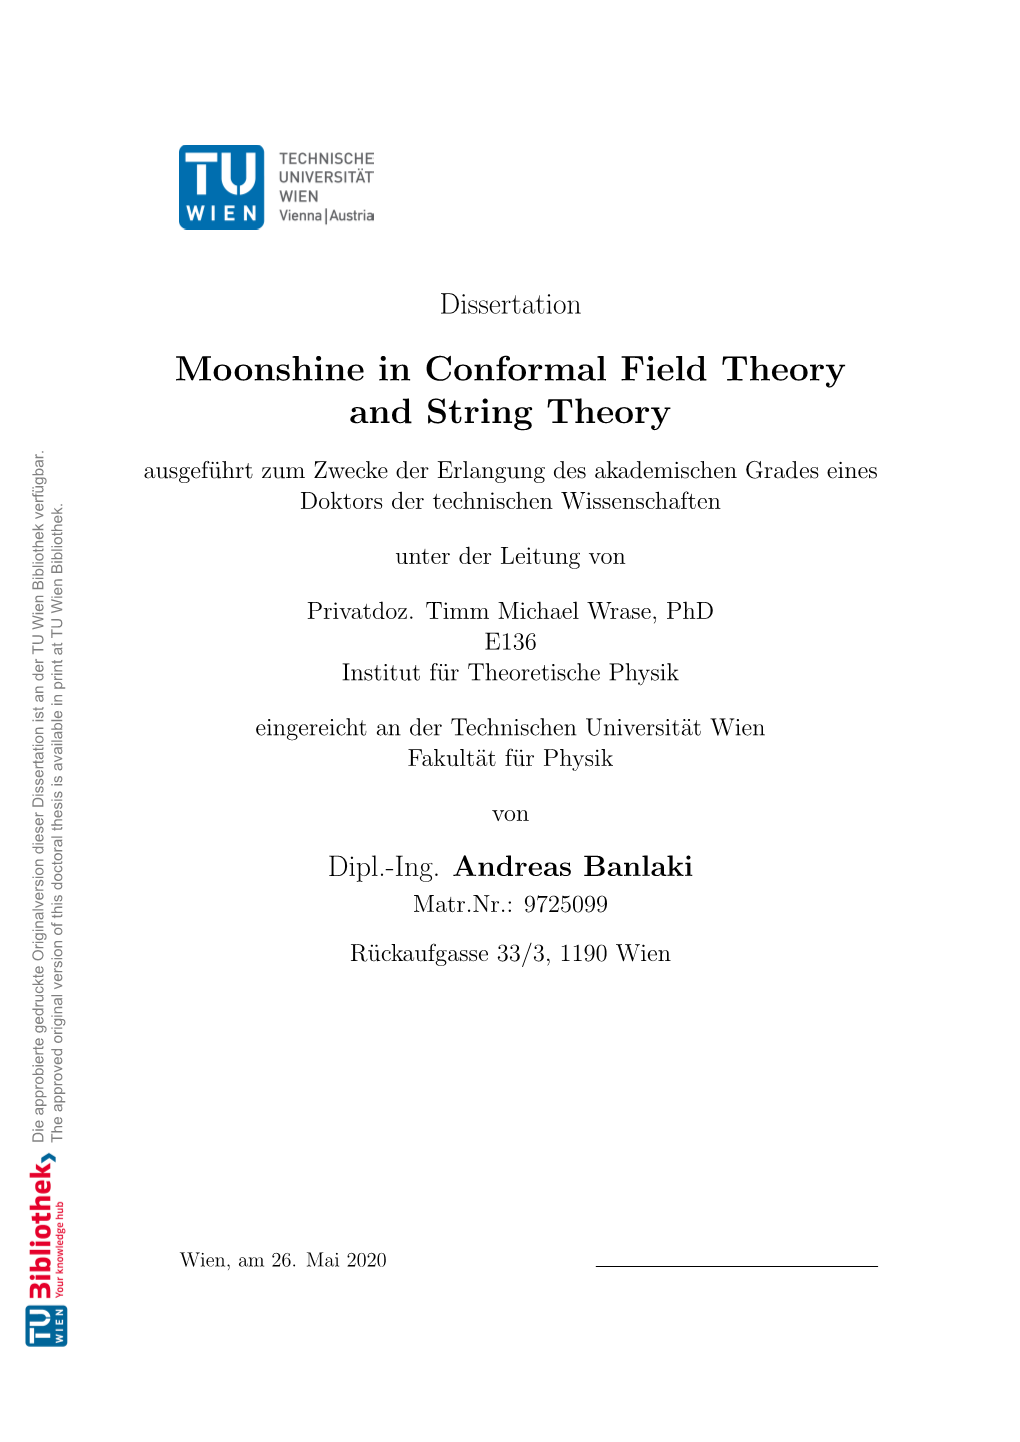 Moonshine in Conformal Field Theory, String Theory and Gravity